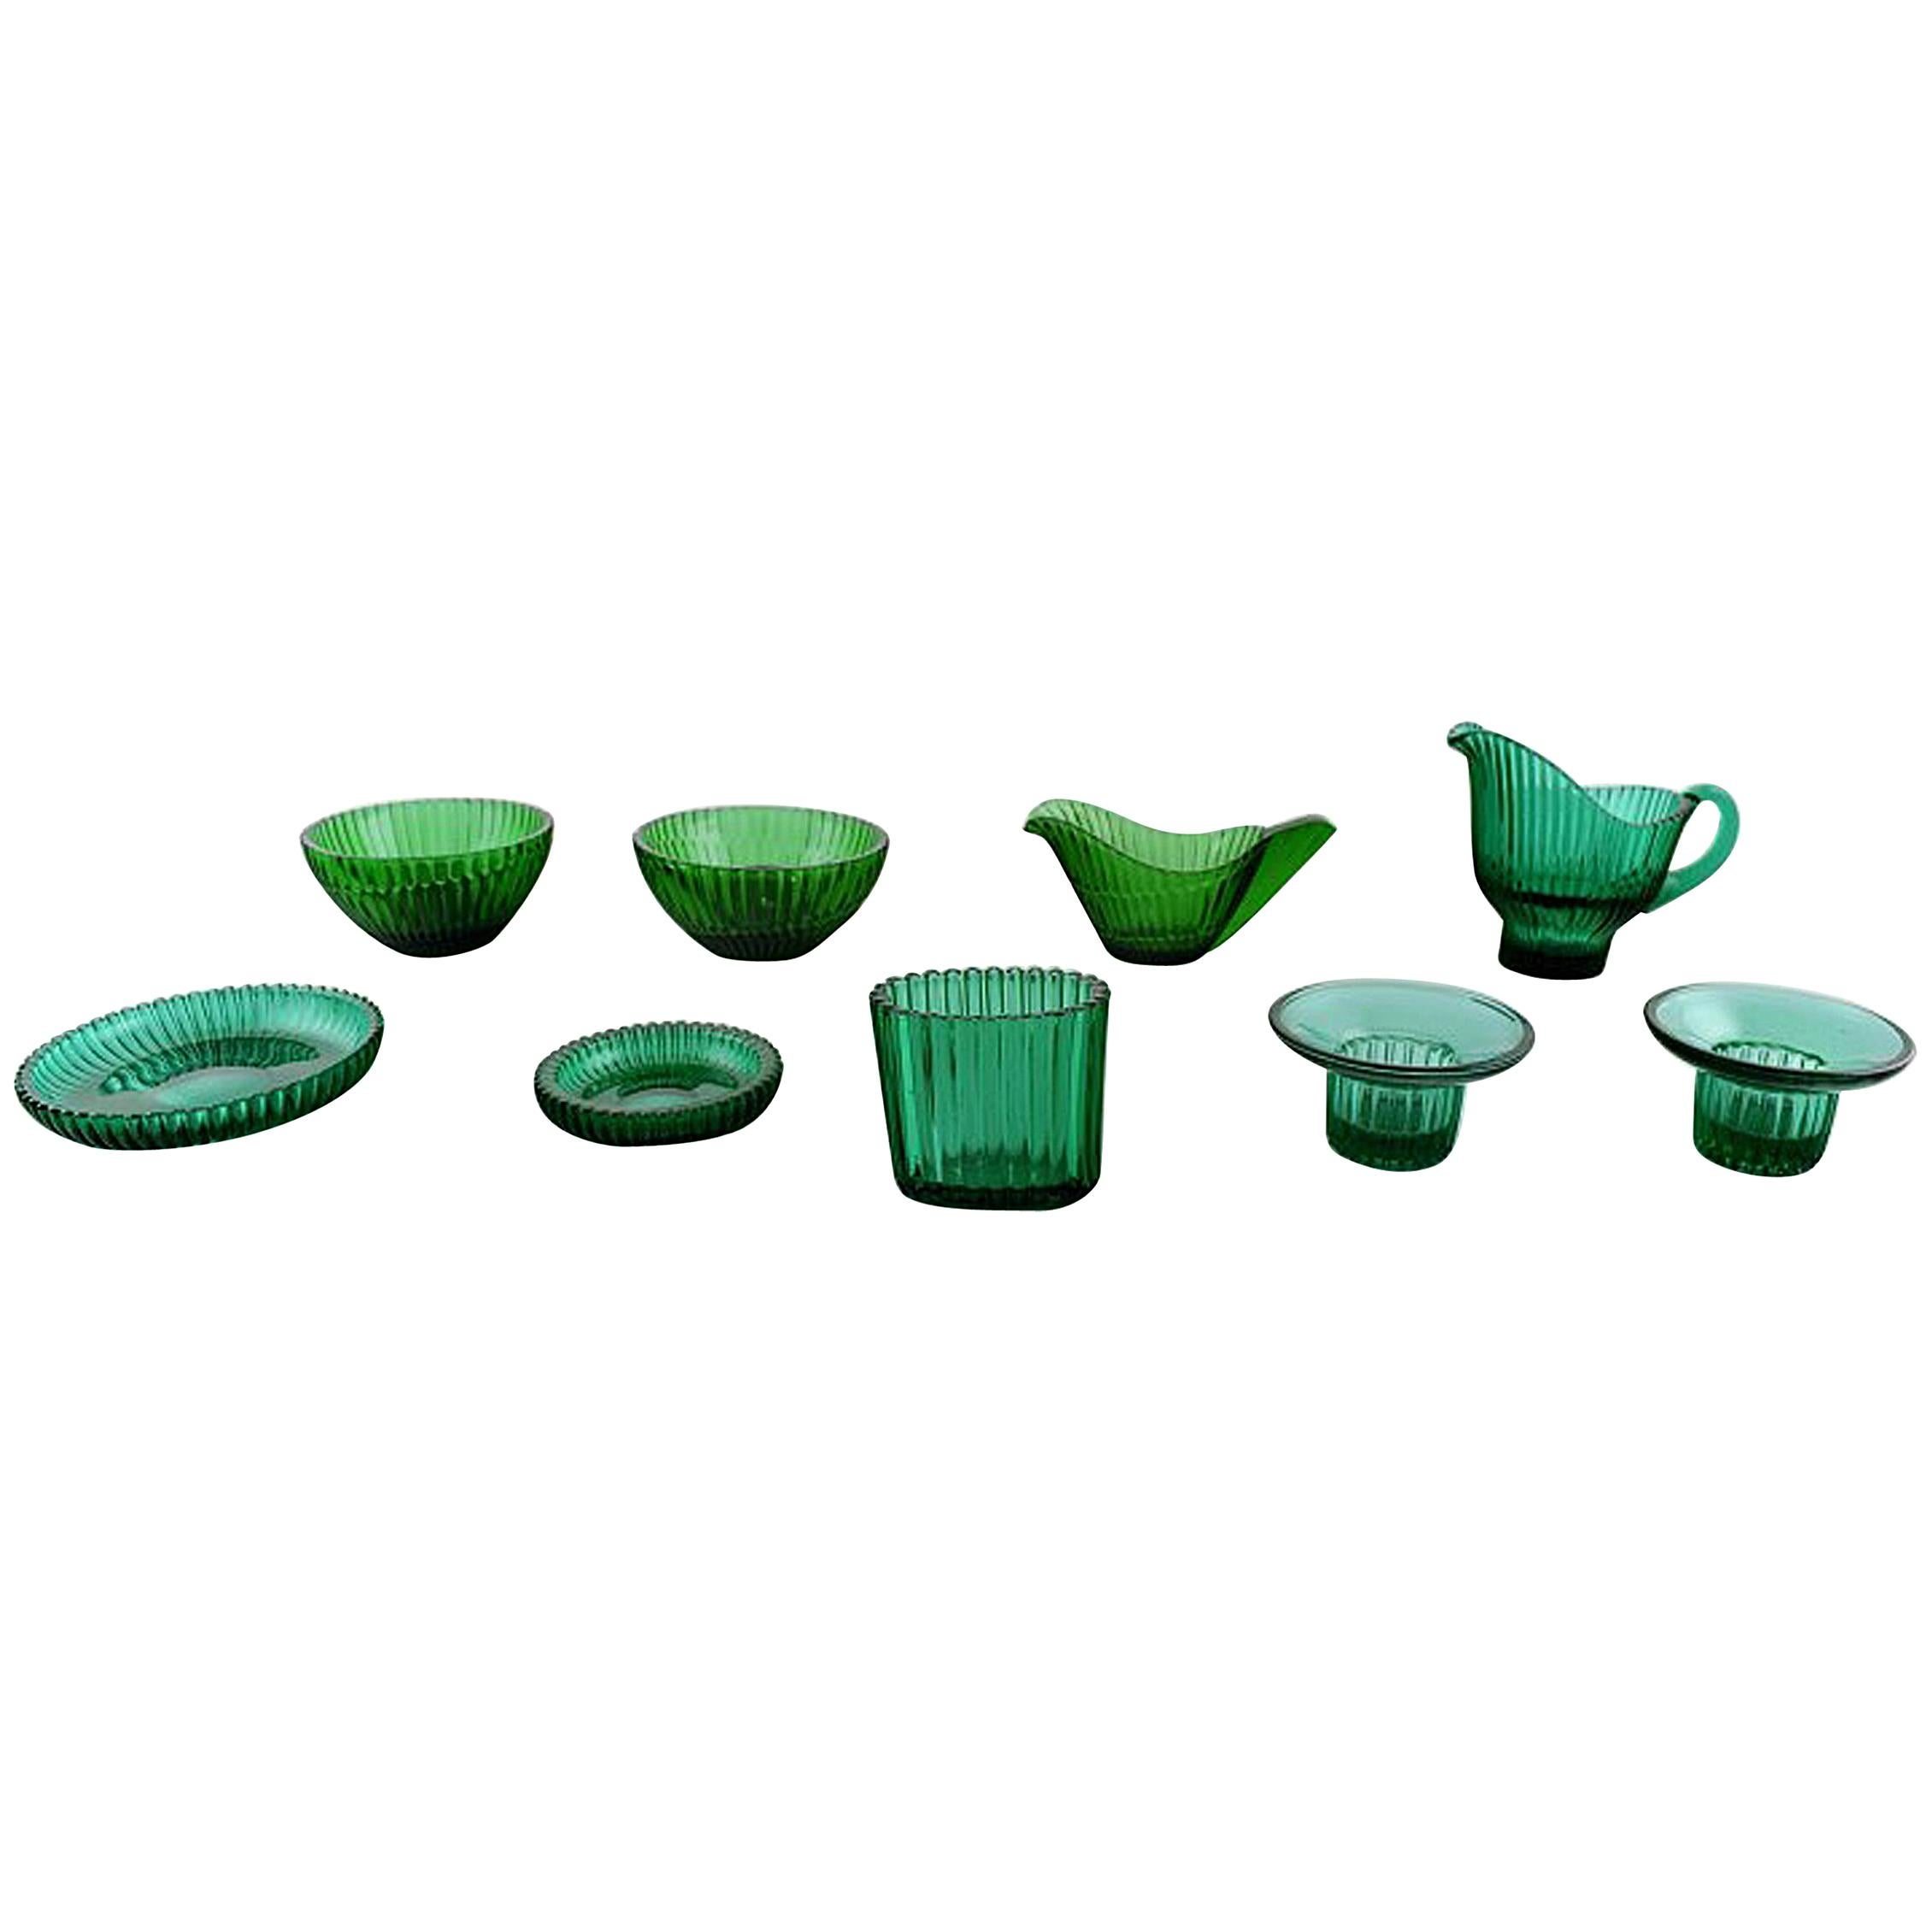 Arthur Percy for Nybro Sweden, Collection of Green Art Glass, 9 Pieces